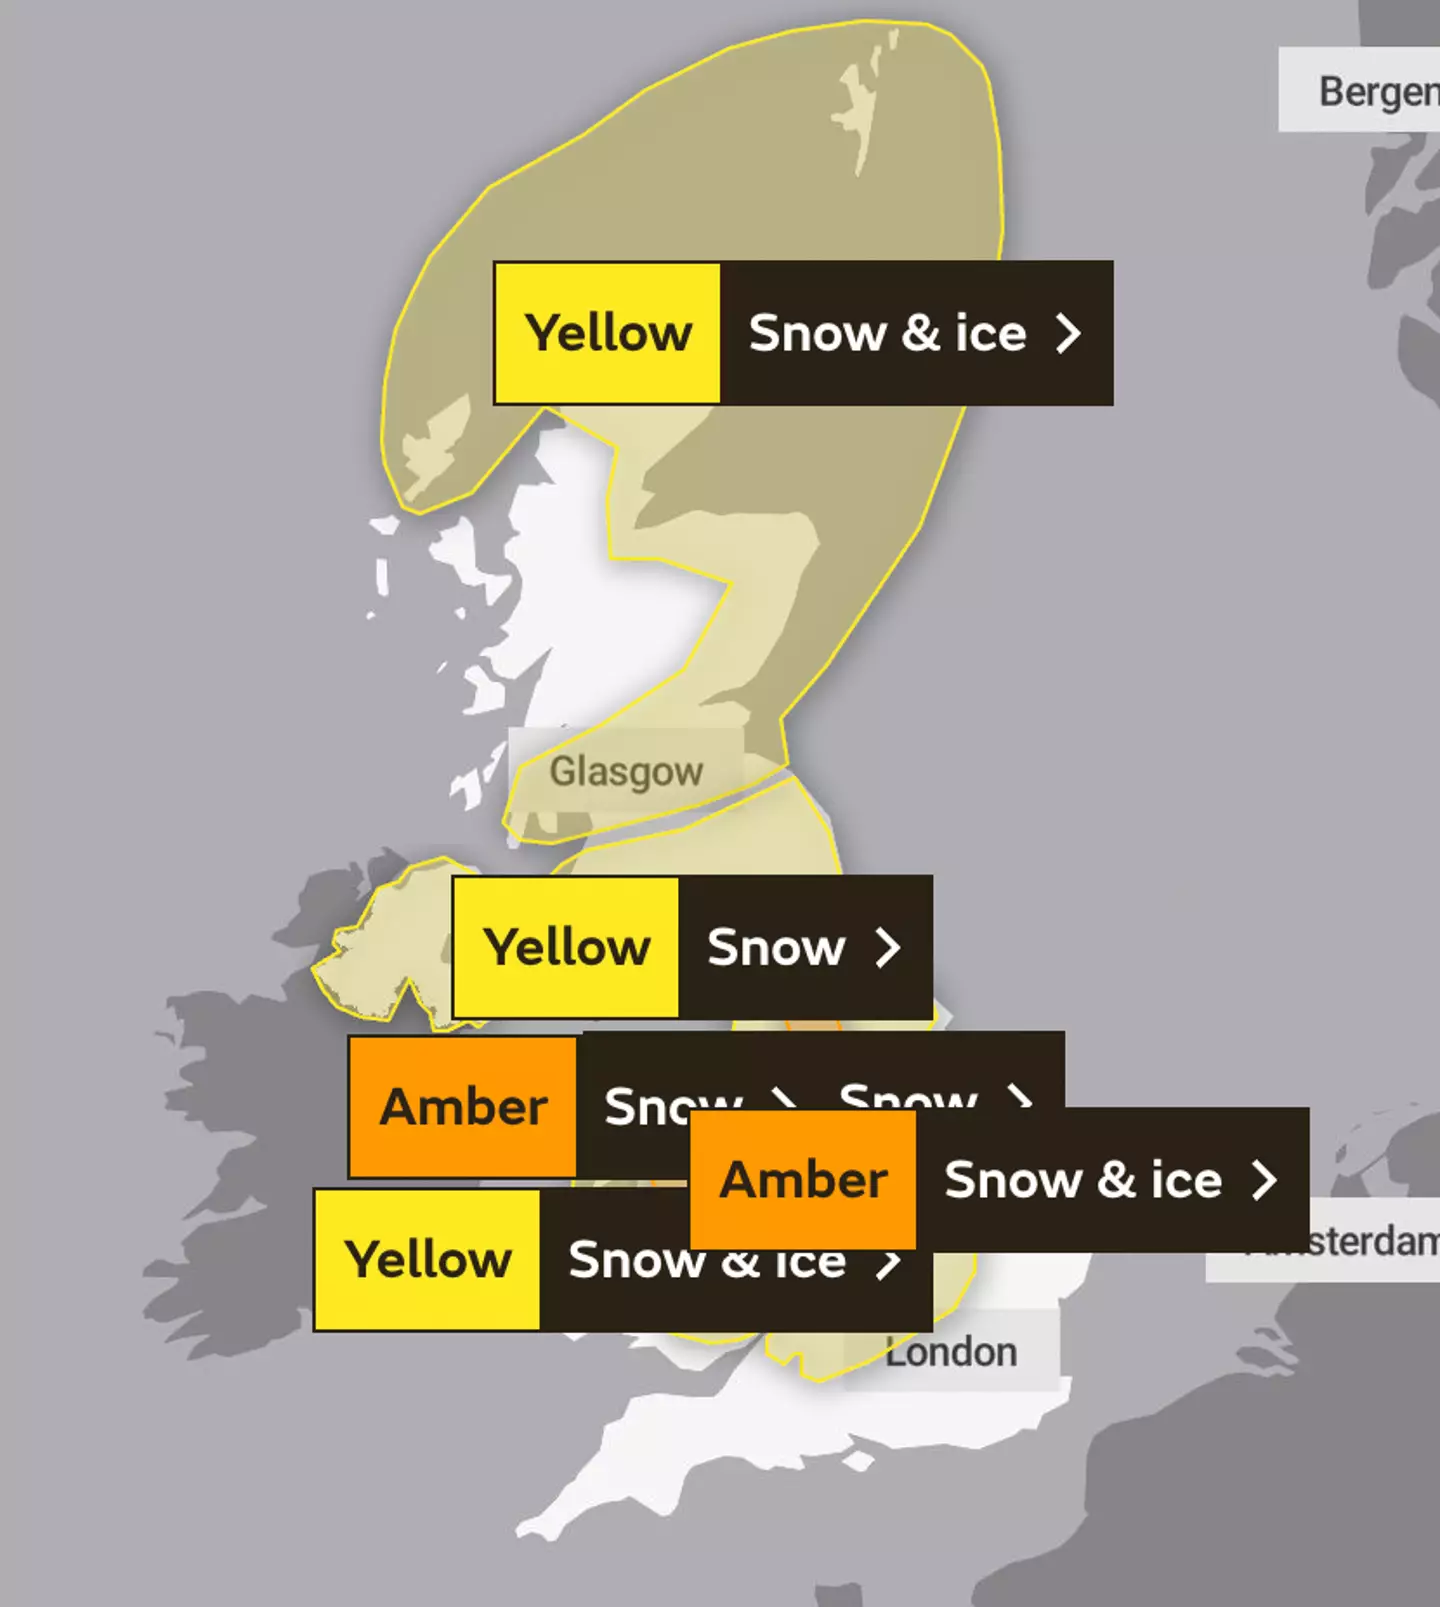 Amber and yellow weather warnings currently remain in place.